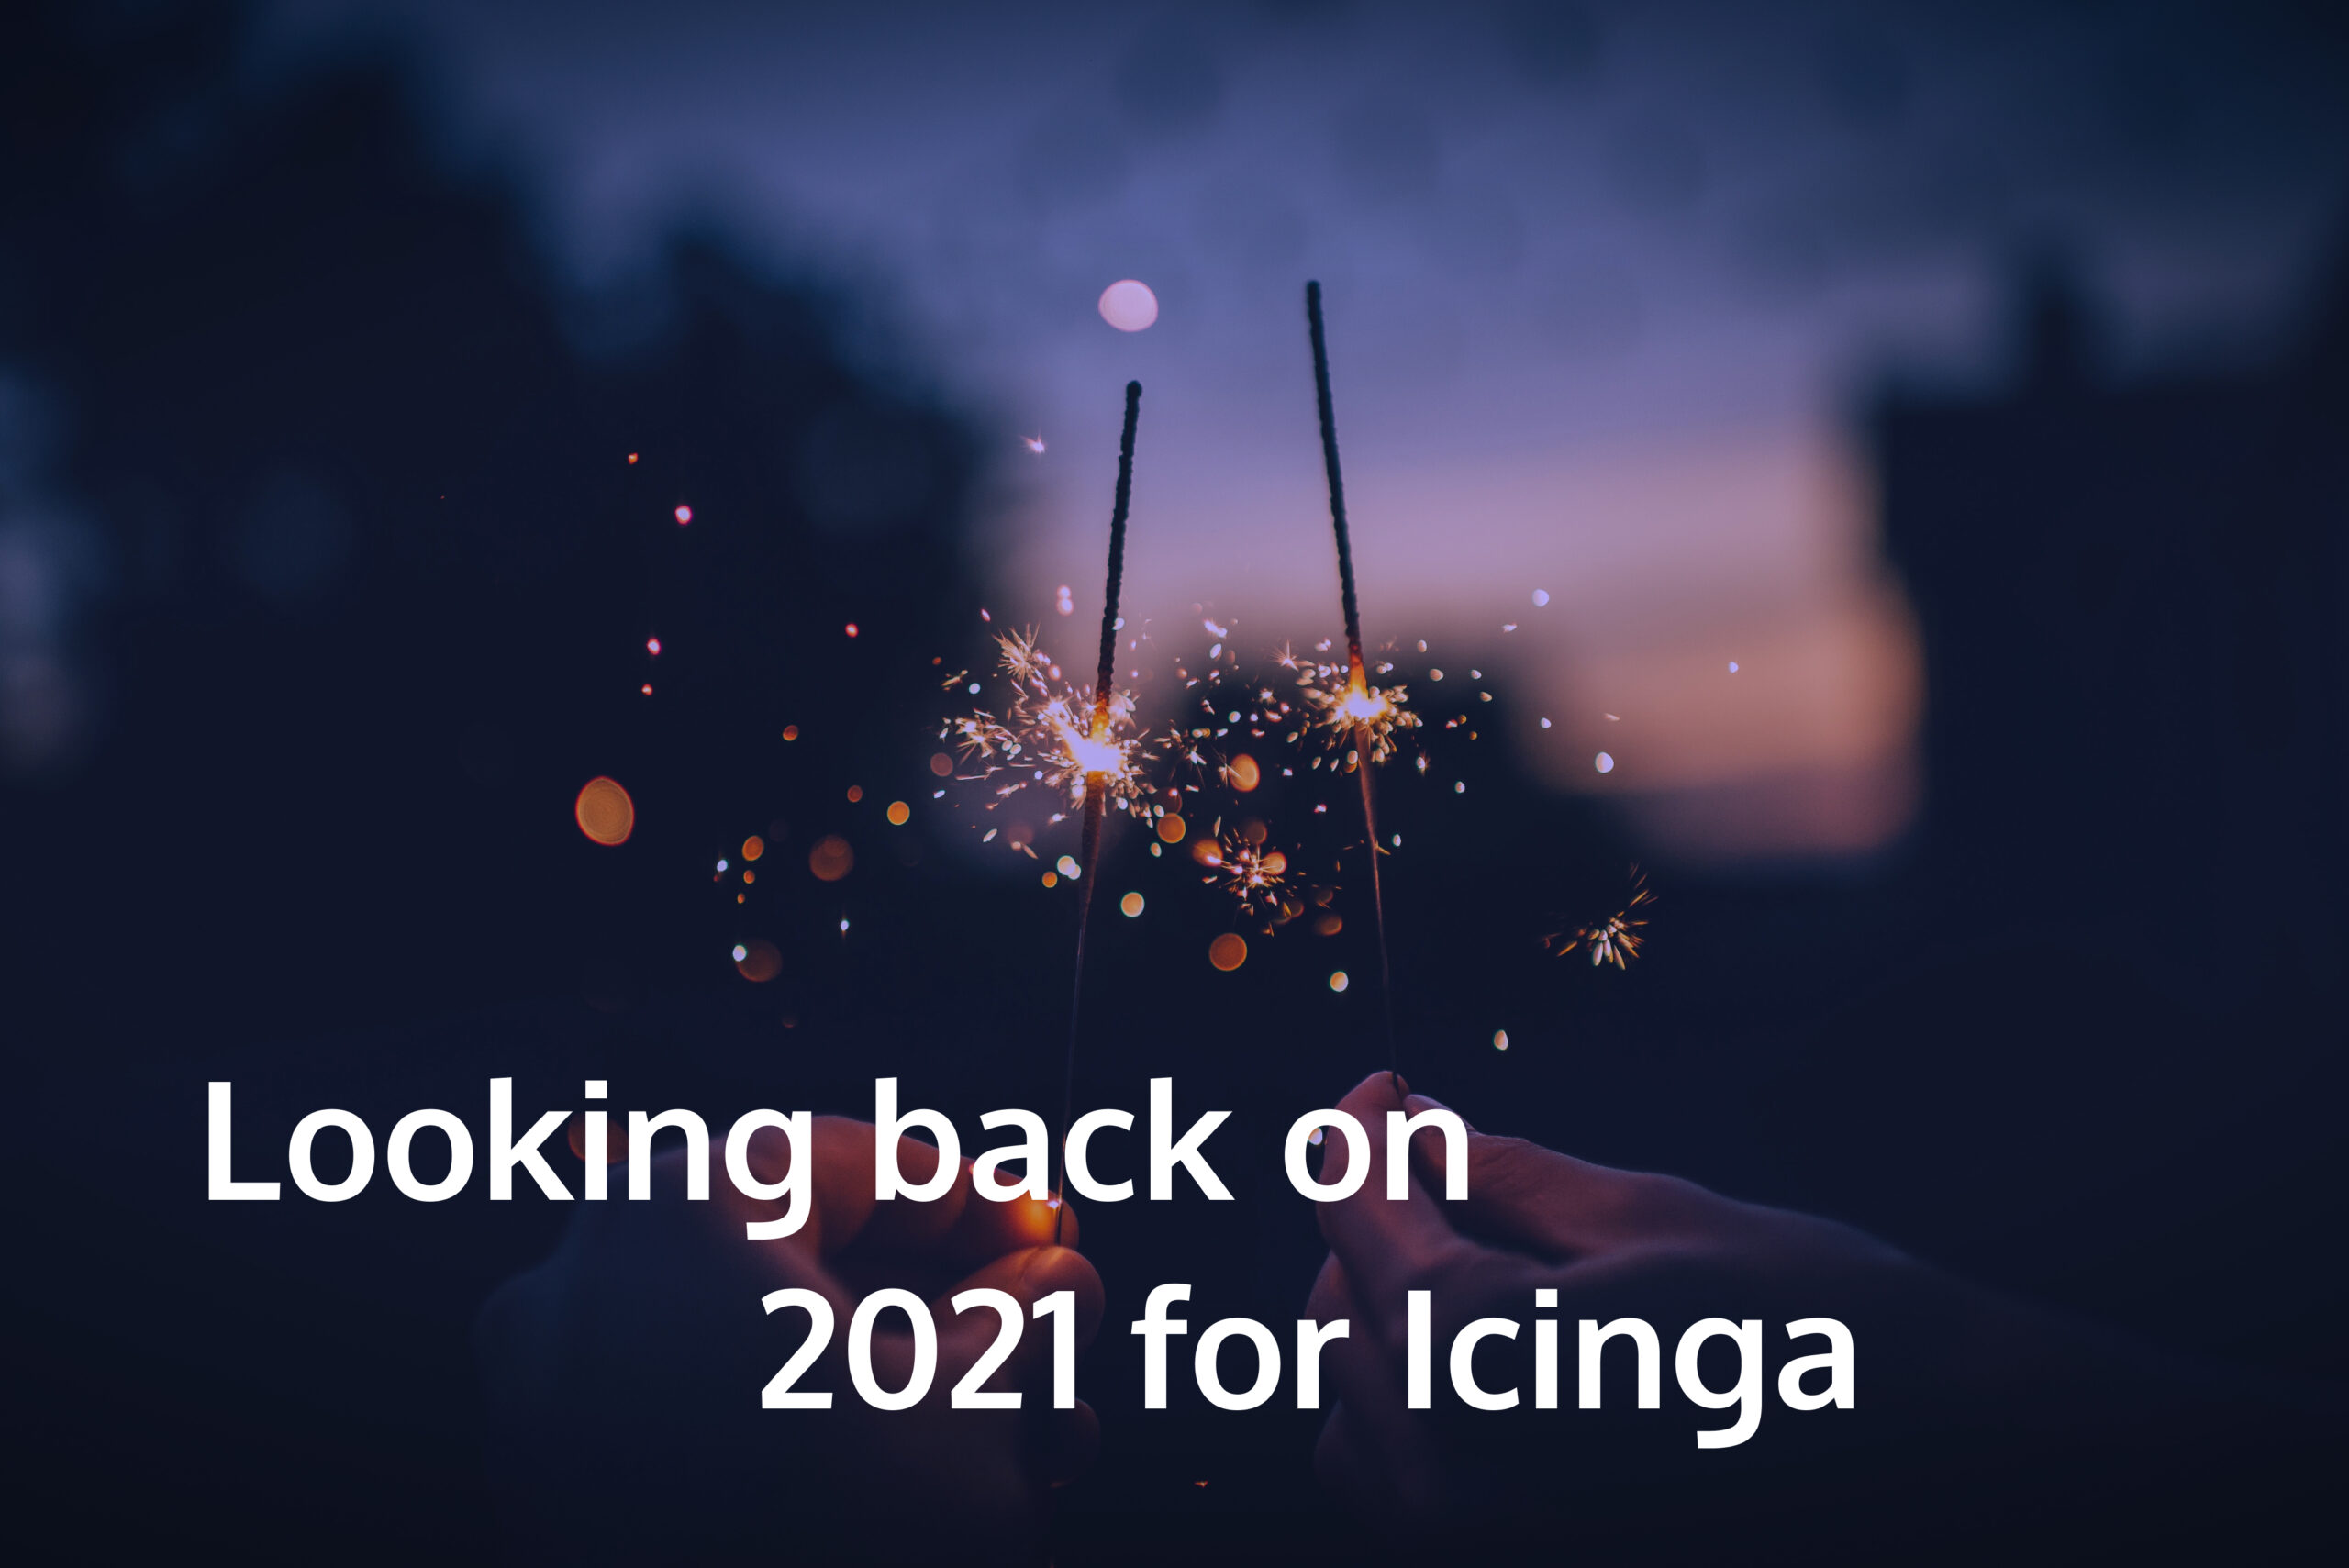 Looking back on 2021 for Icinga